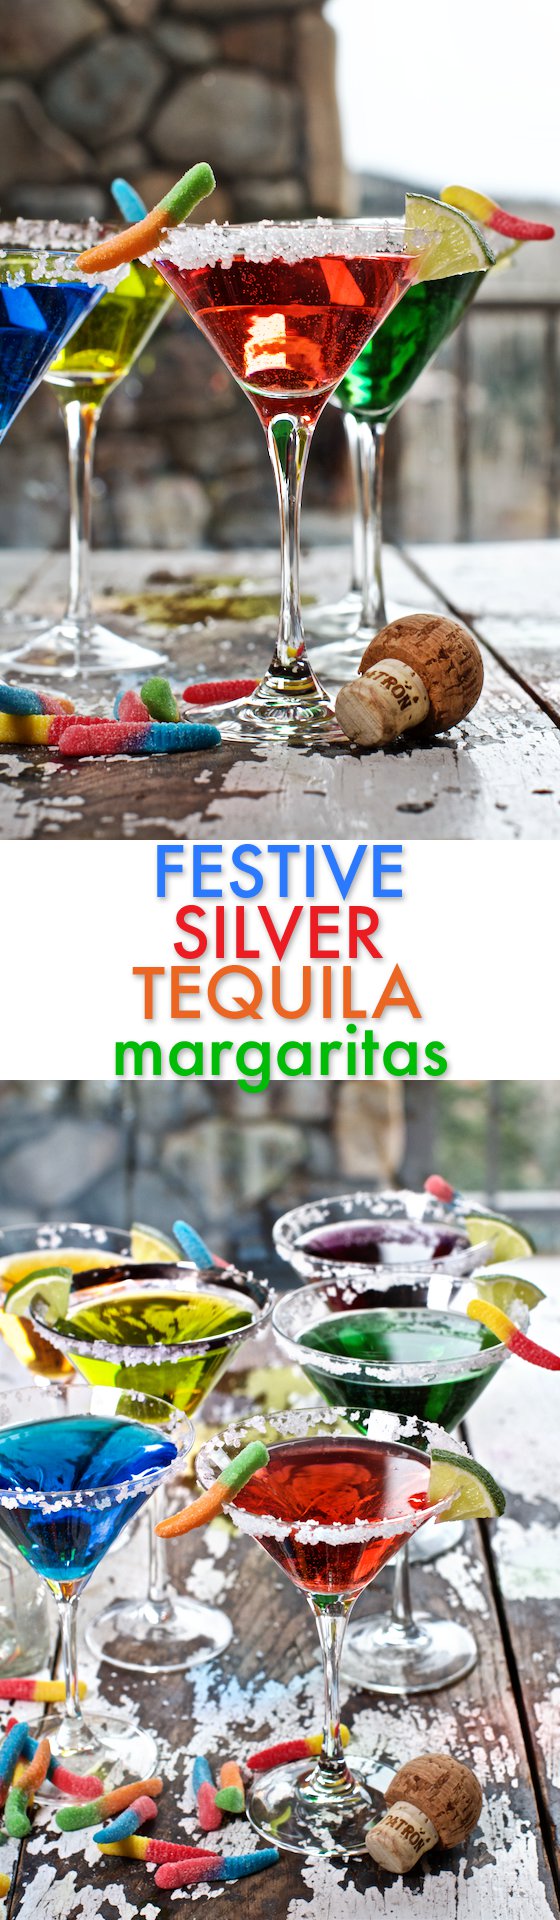 Festive Silver Tequila Margaritas! This Holiday Cocktail Recipe can be custom colored to suit any themed celebration! MarlaMeridith.com ( @marlameridith )